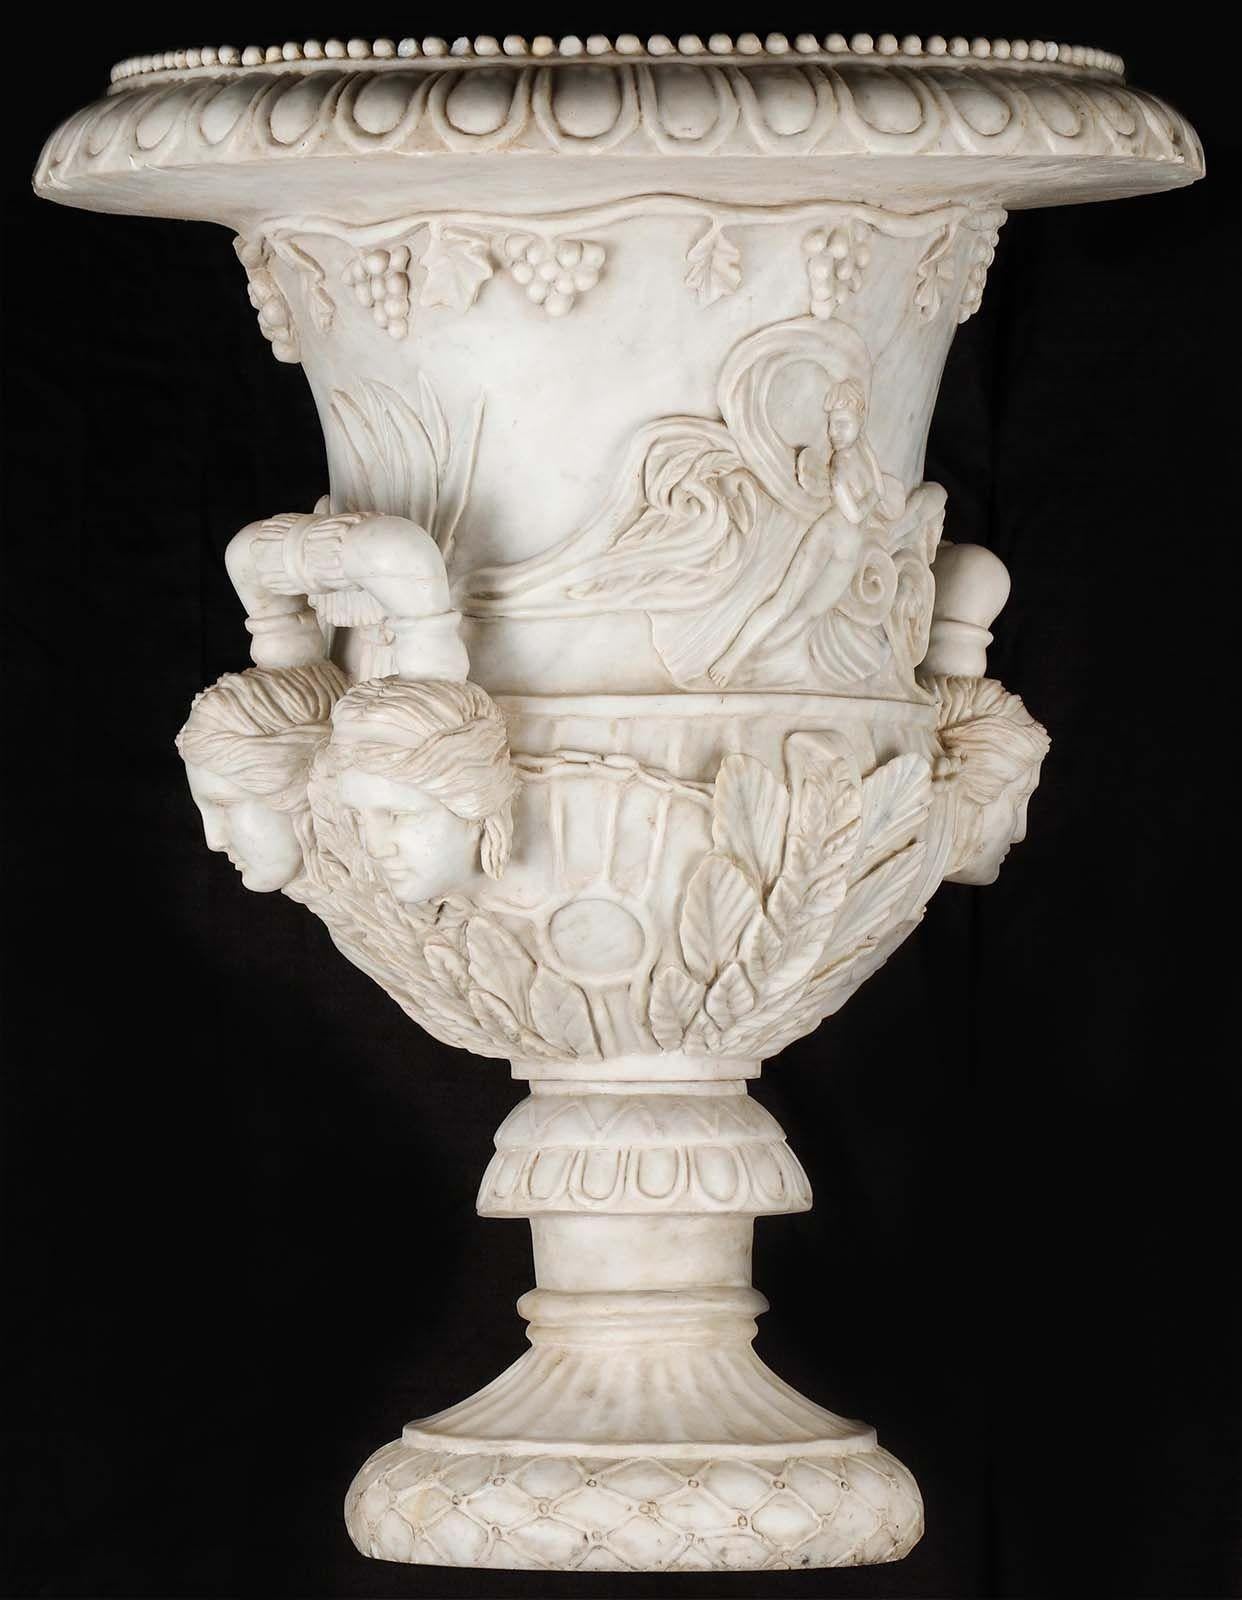 Pair of Italian Palatial Garden Urns/Medici Vases with Carved Marble In Good Condition For Sale In Los Angeles, CA